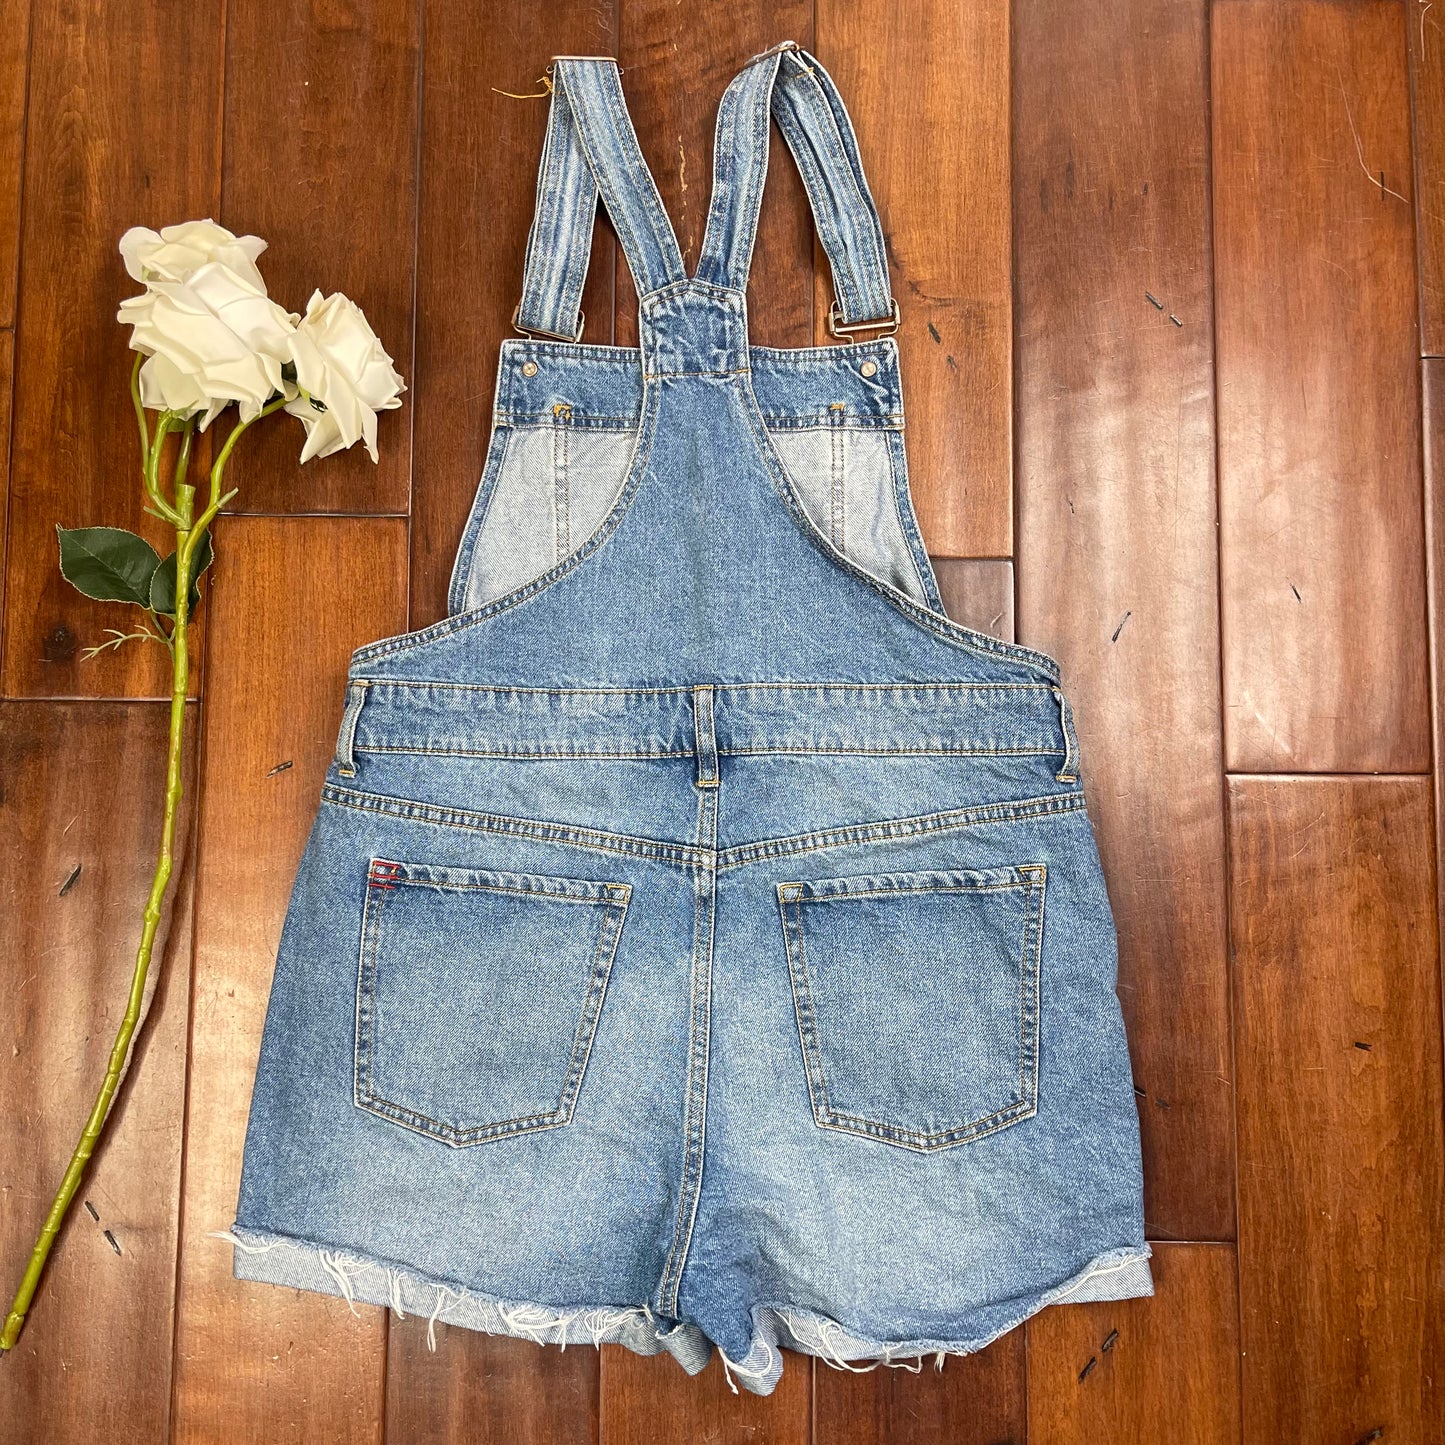 THRIFTED OVERALL SHORTS